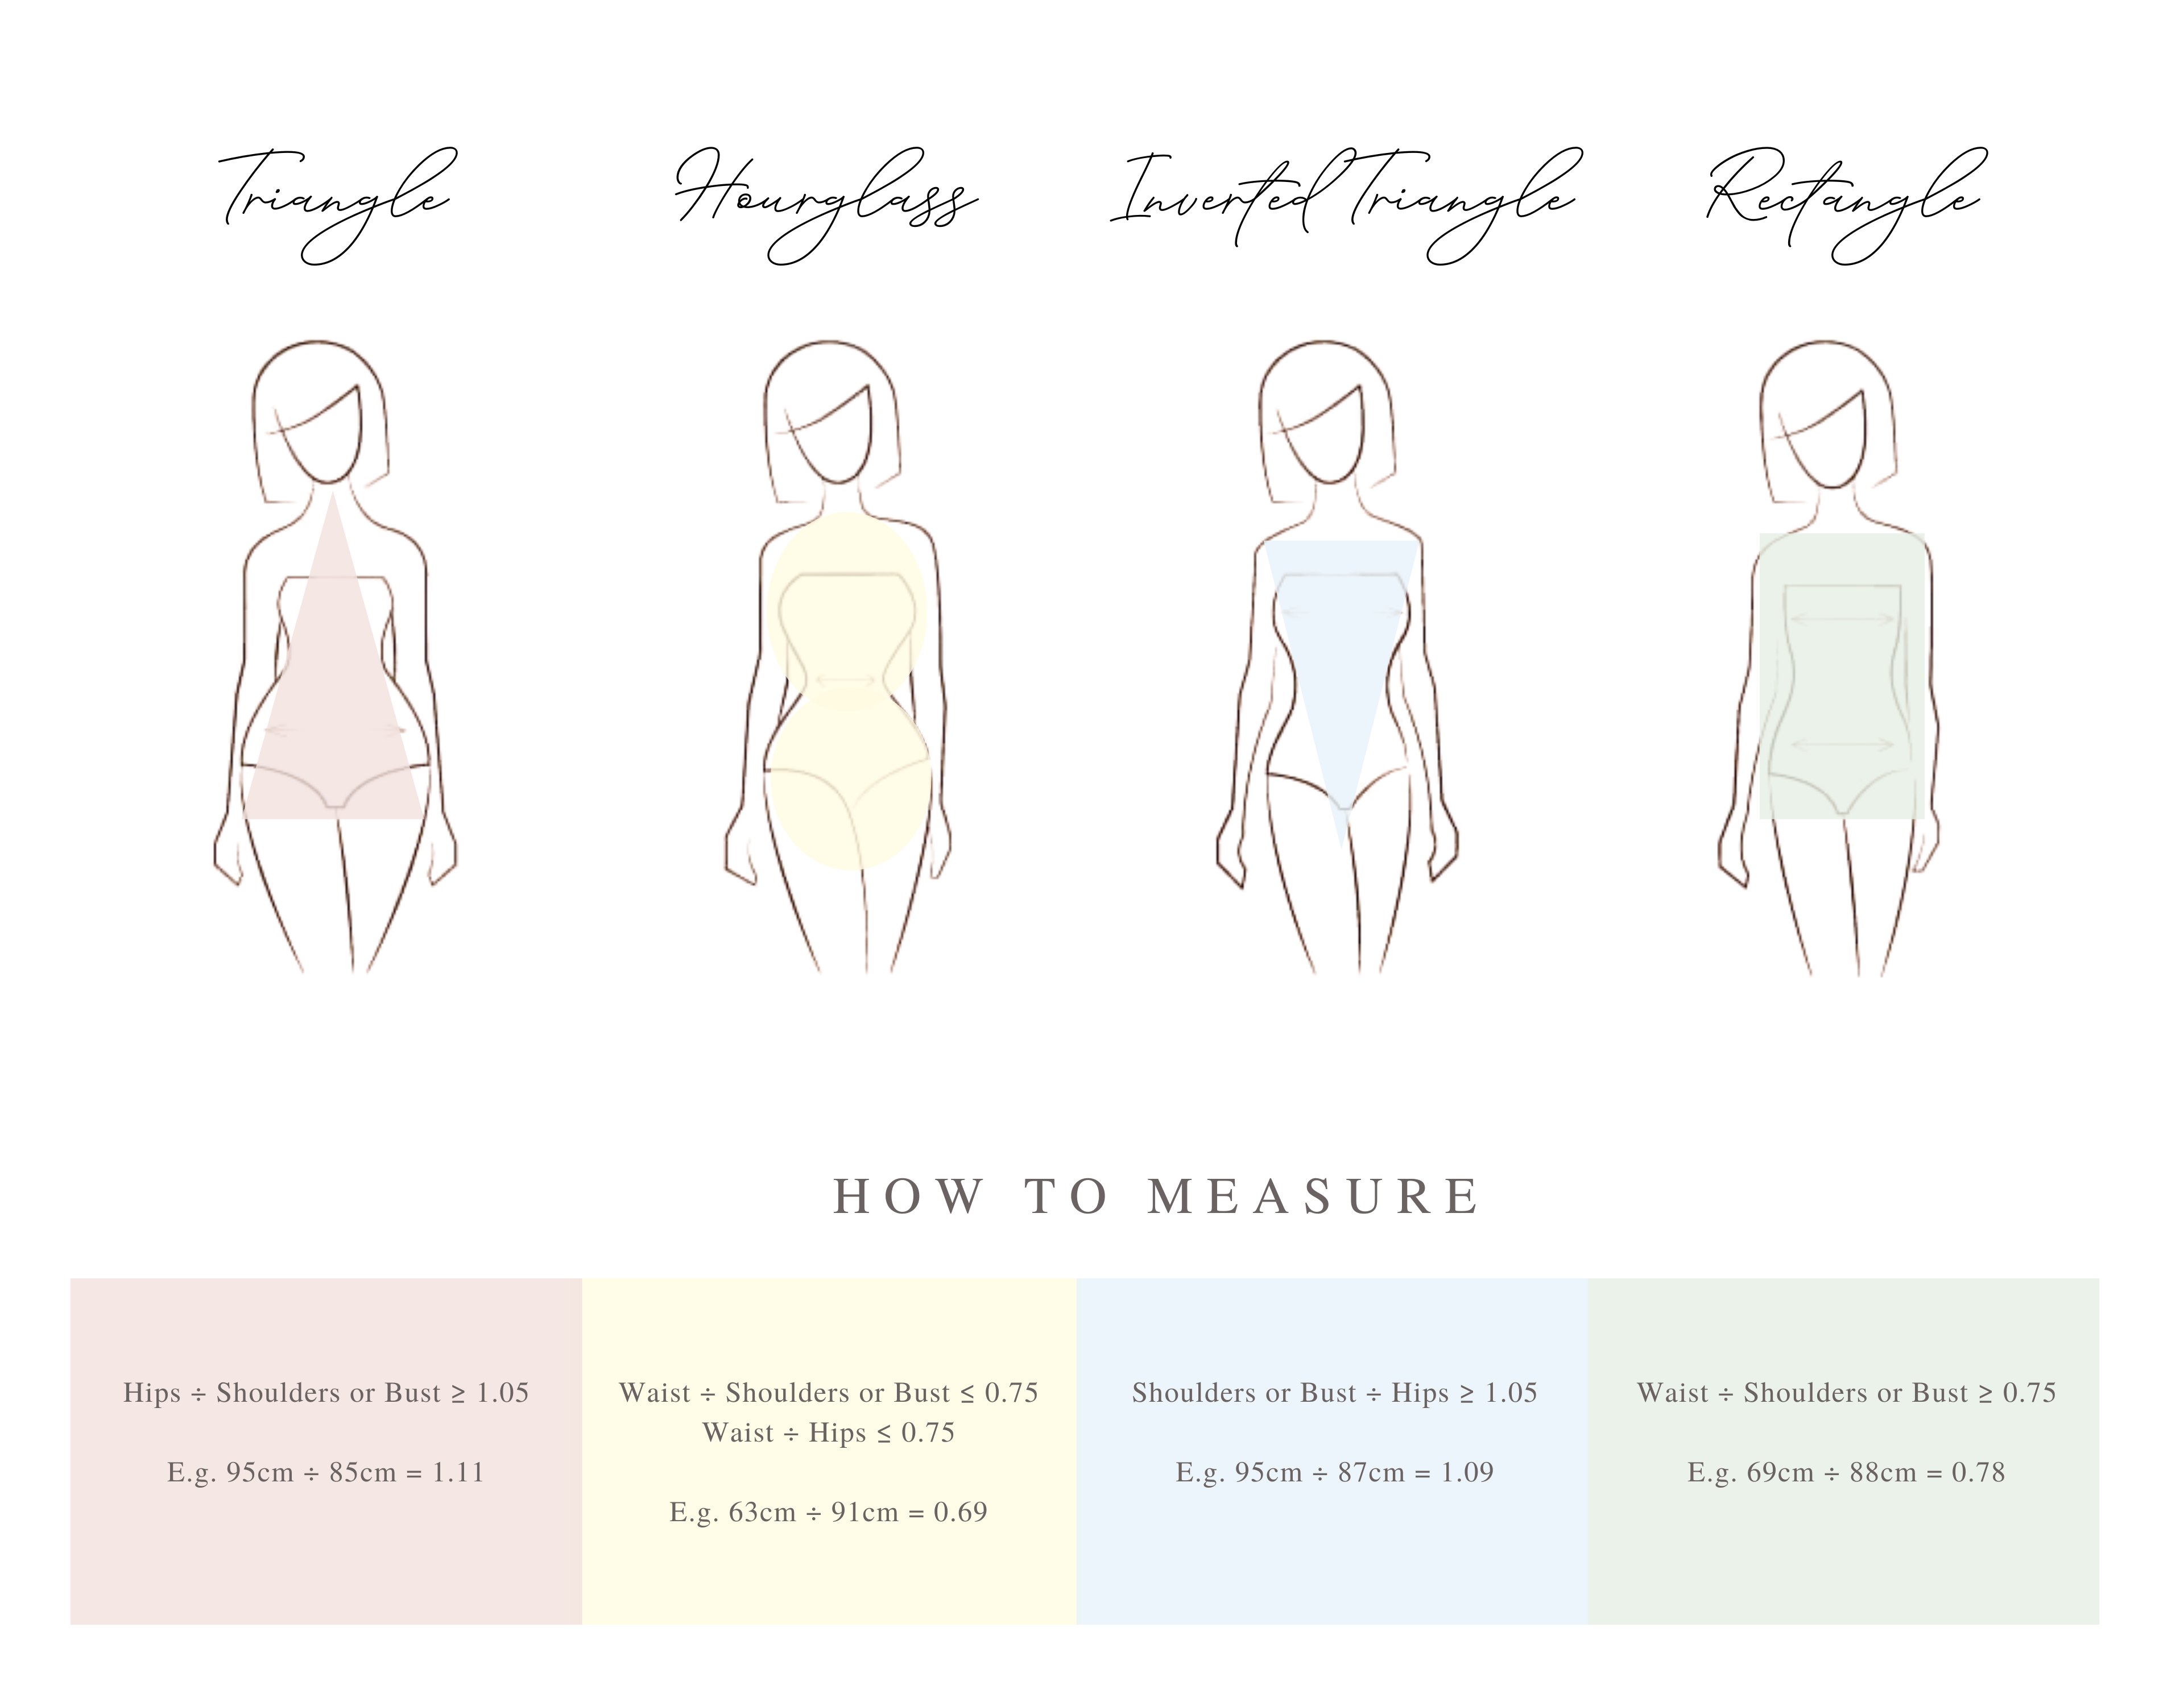 Different body shapes - Straight, Hourglass, Athletic, Pear - And